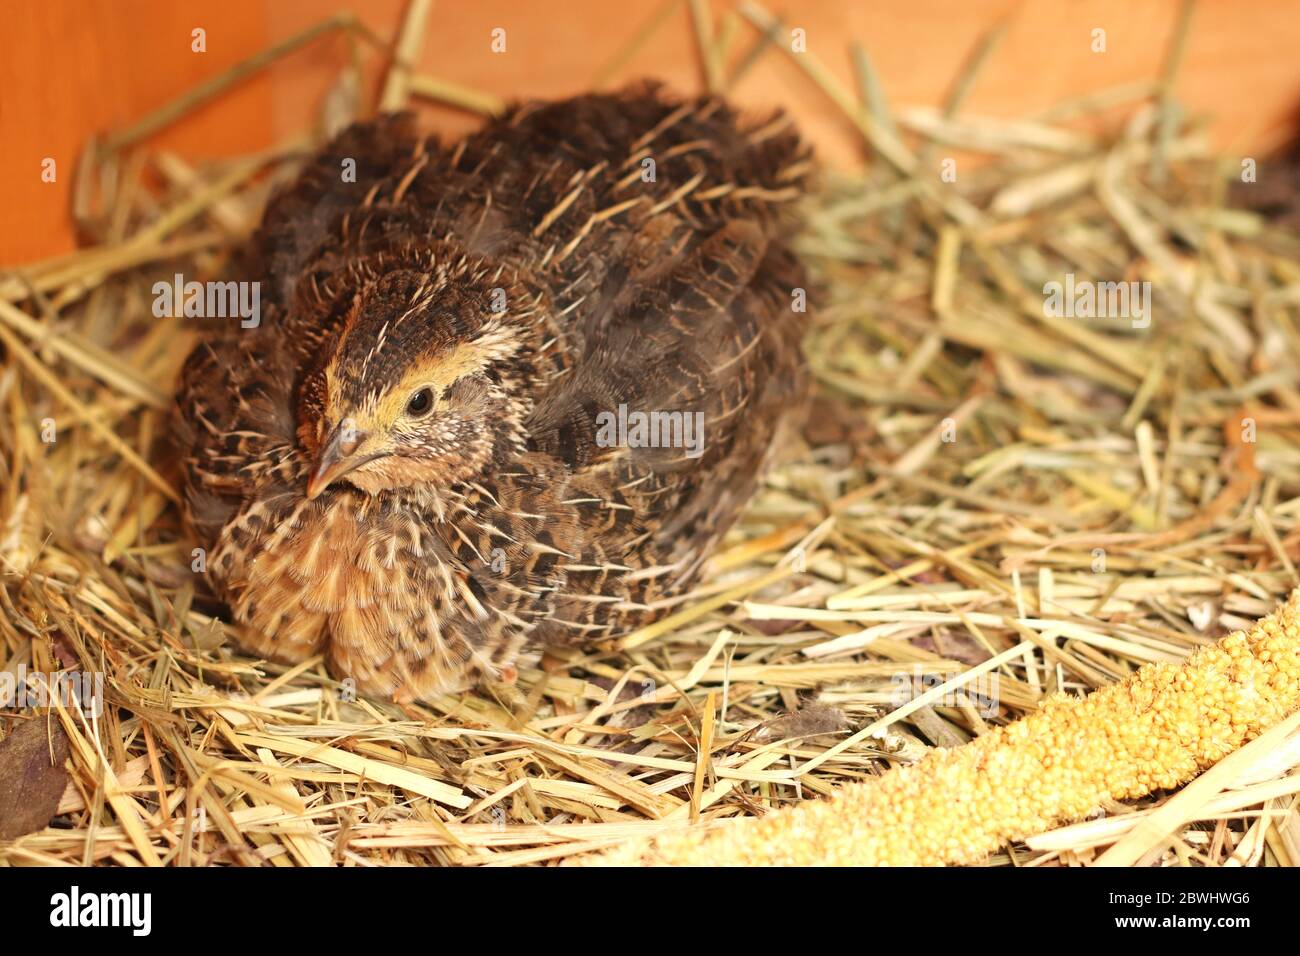 young ruddy japanese quail sitting on straw Stock Photo